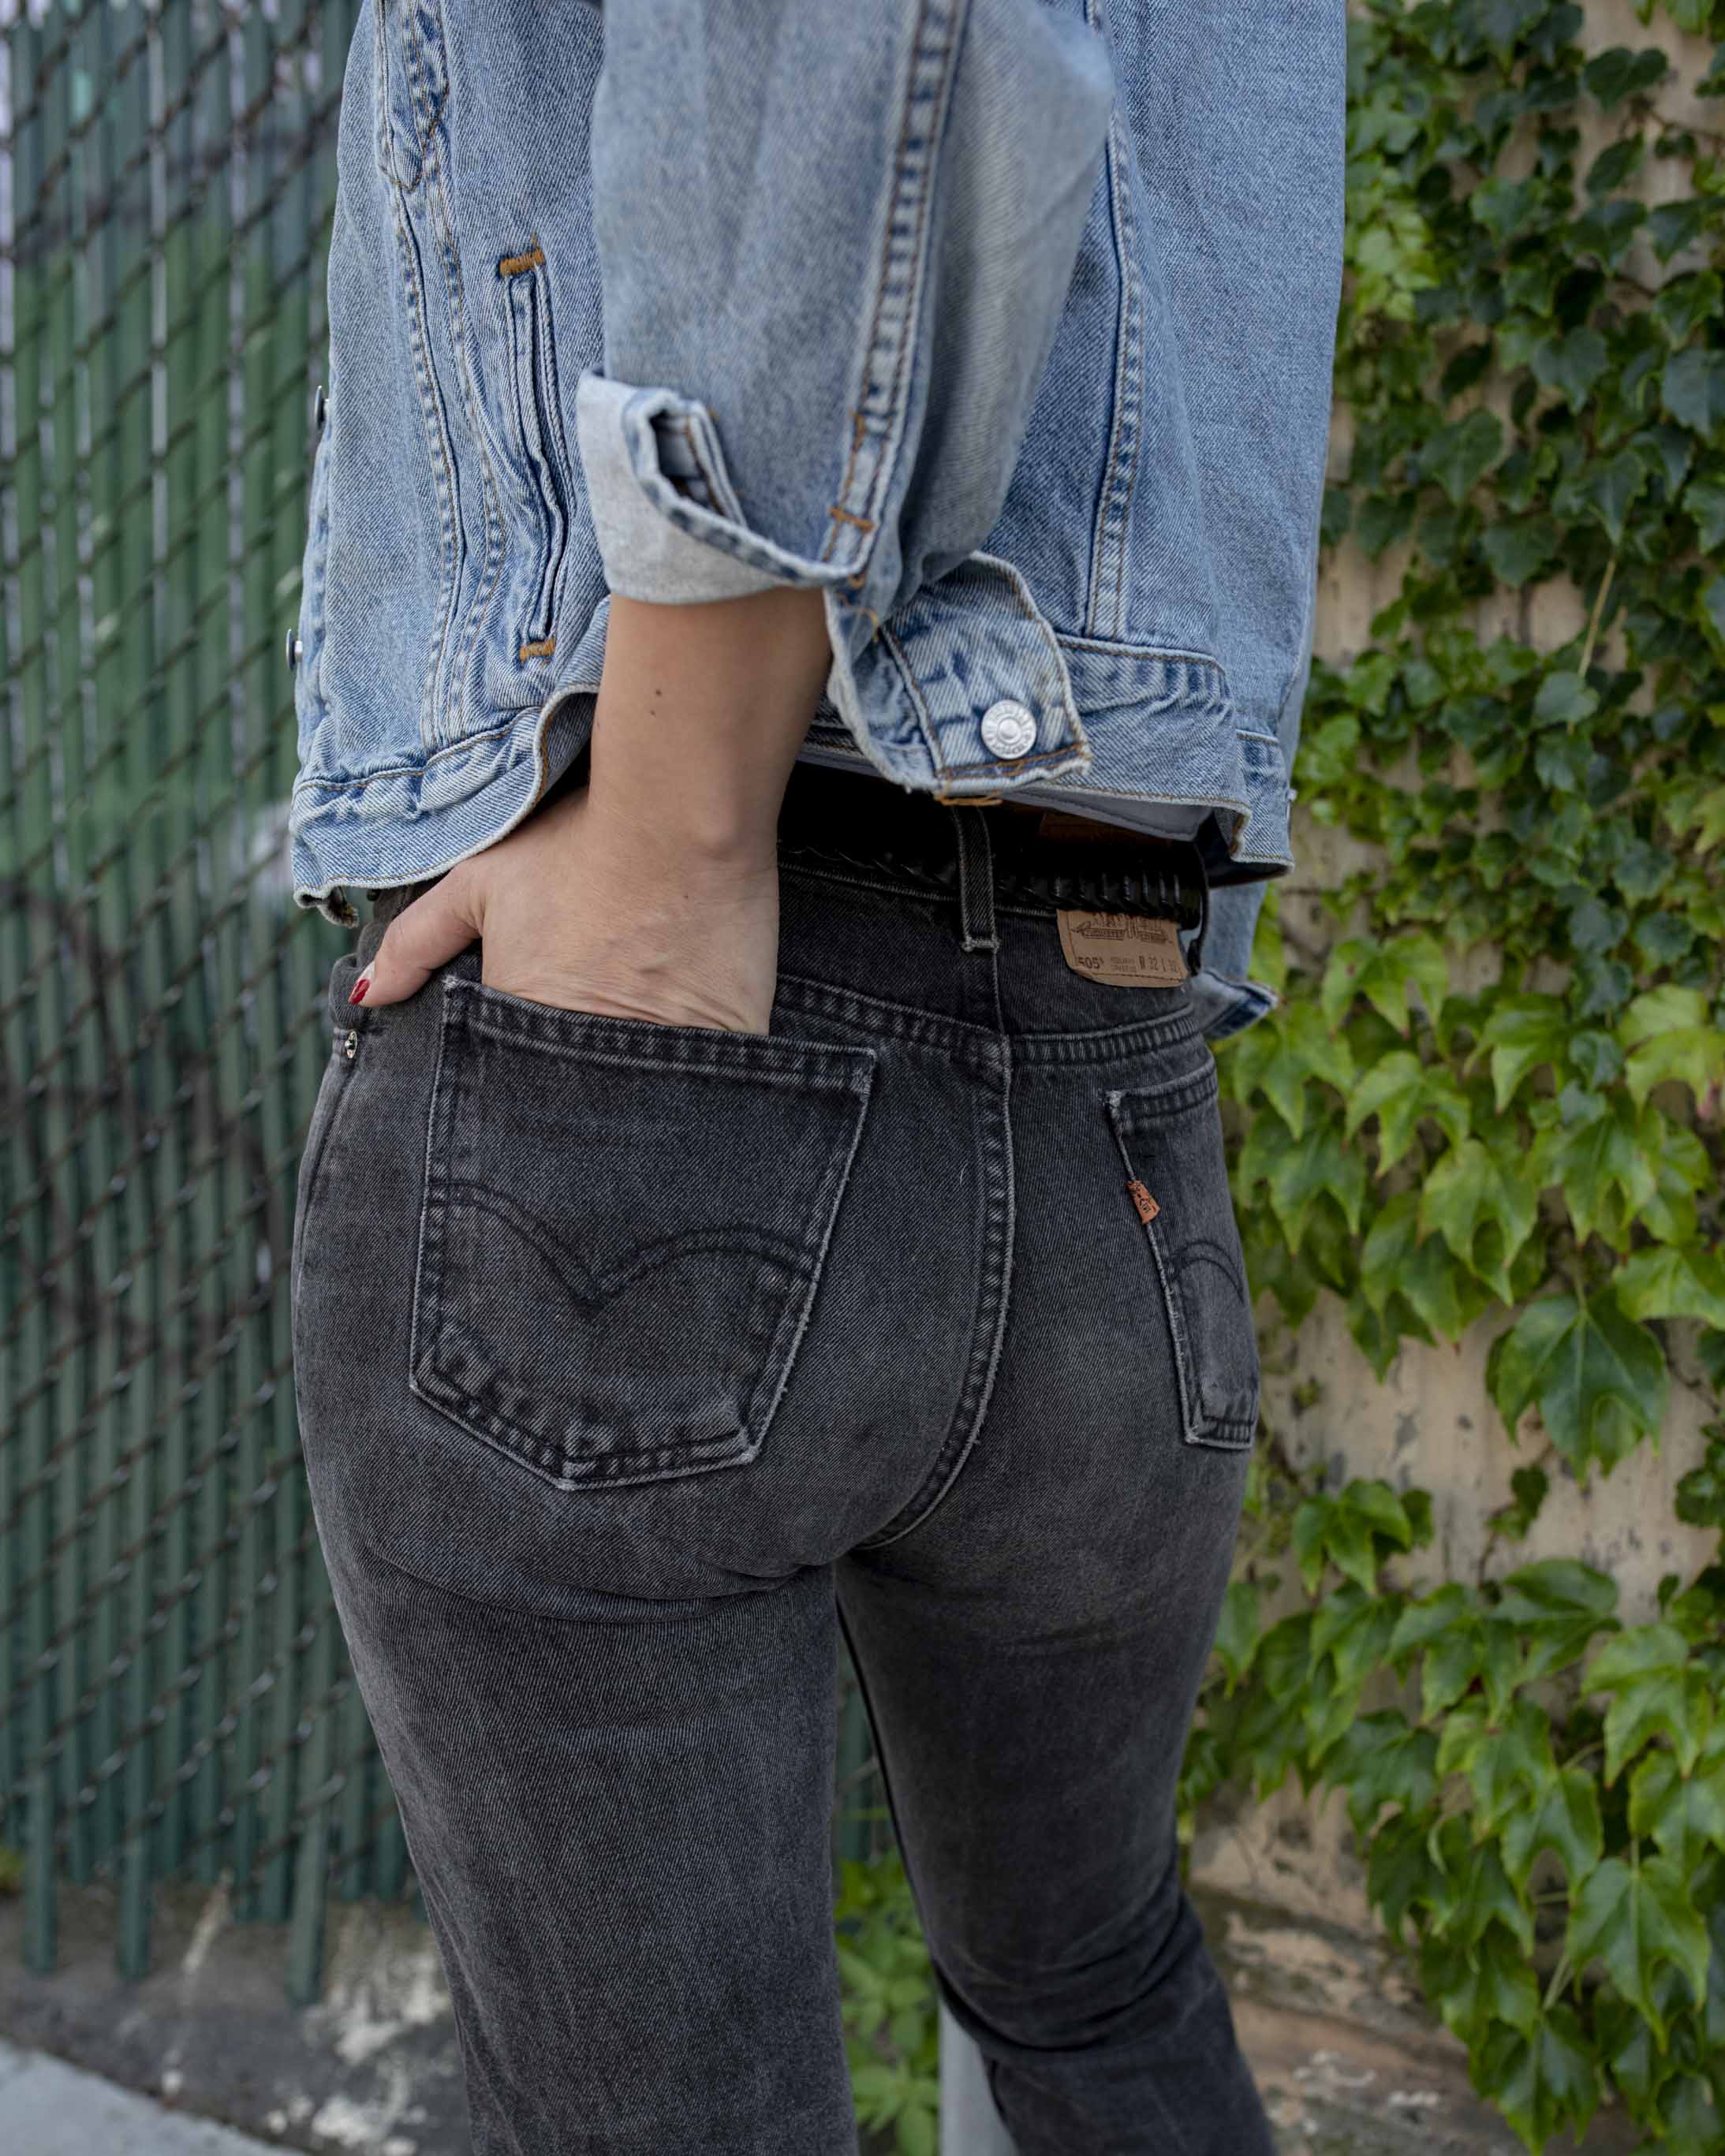 P R O D U C T : Levi's Vintage Clothing Denim Fit Guide – Pickings and Parry